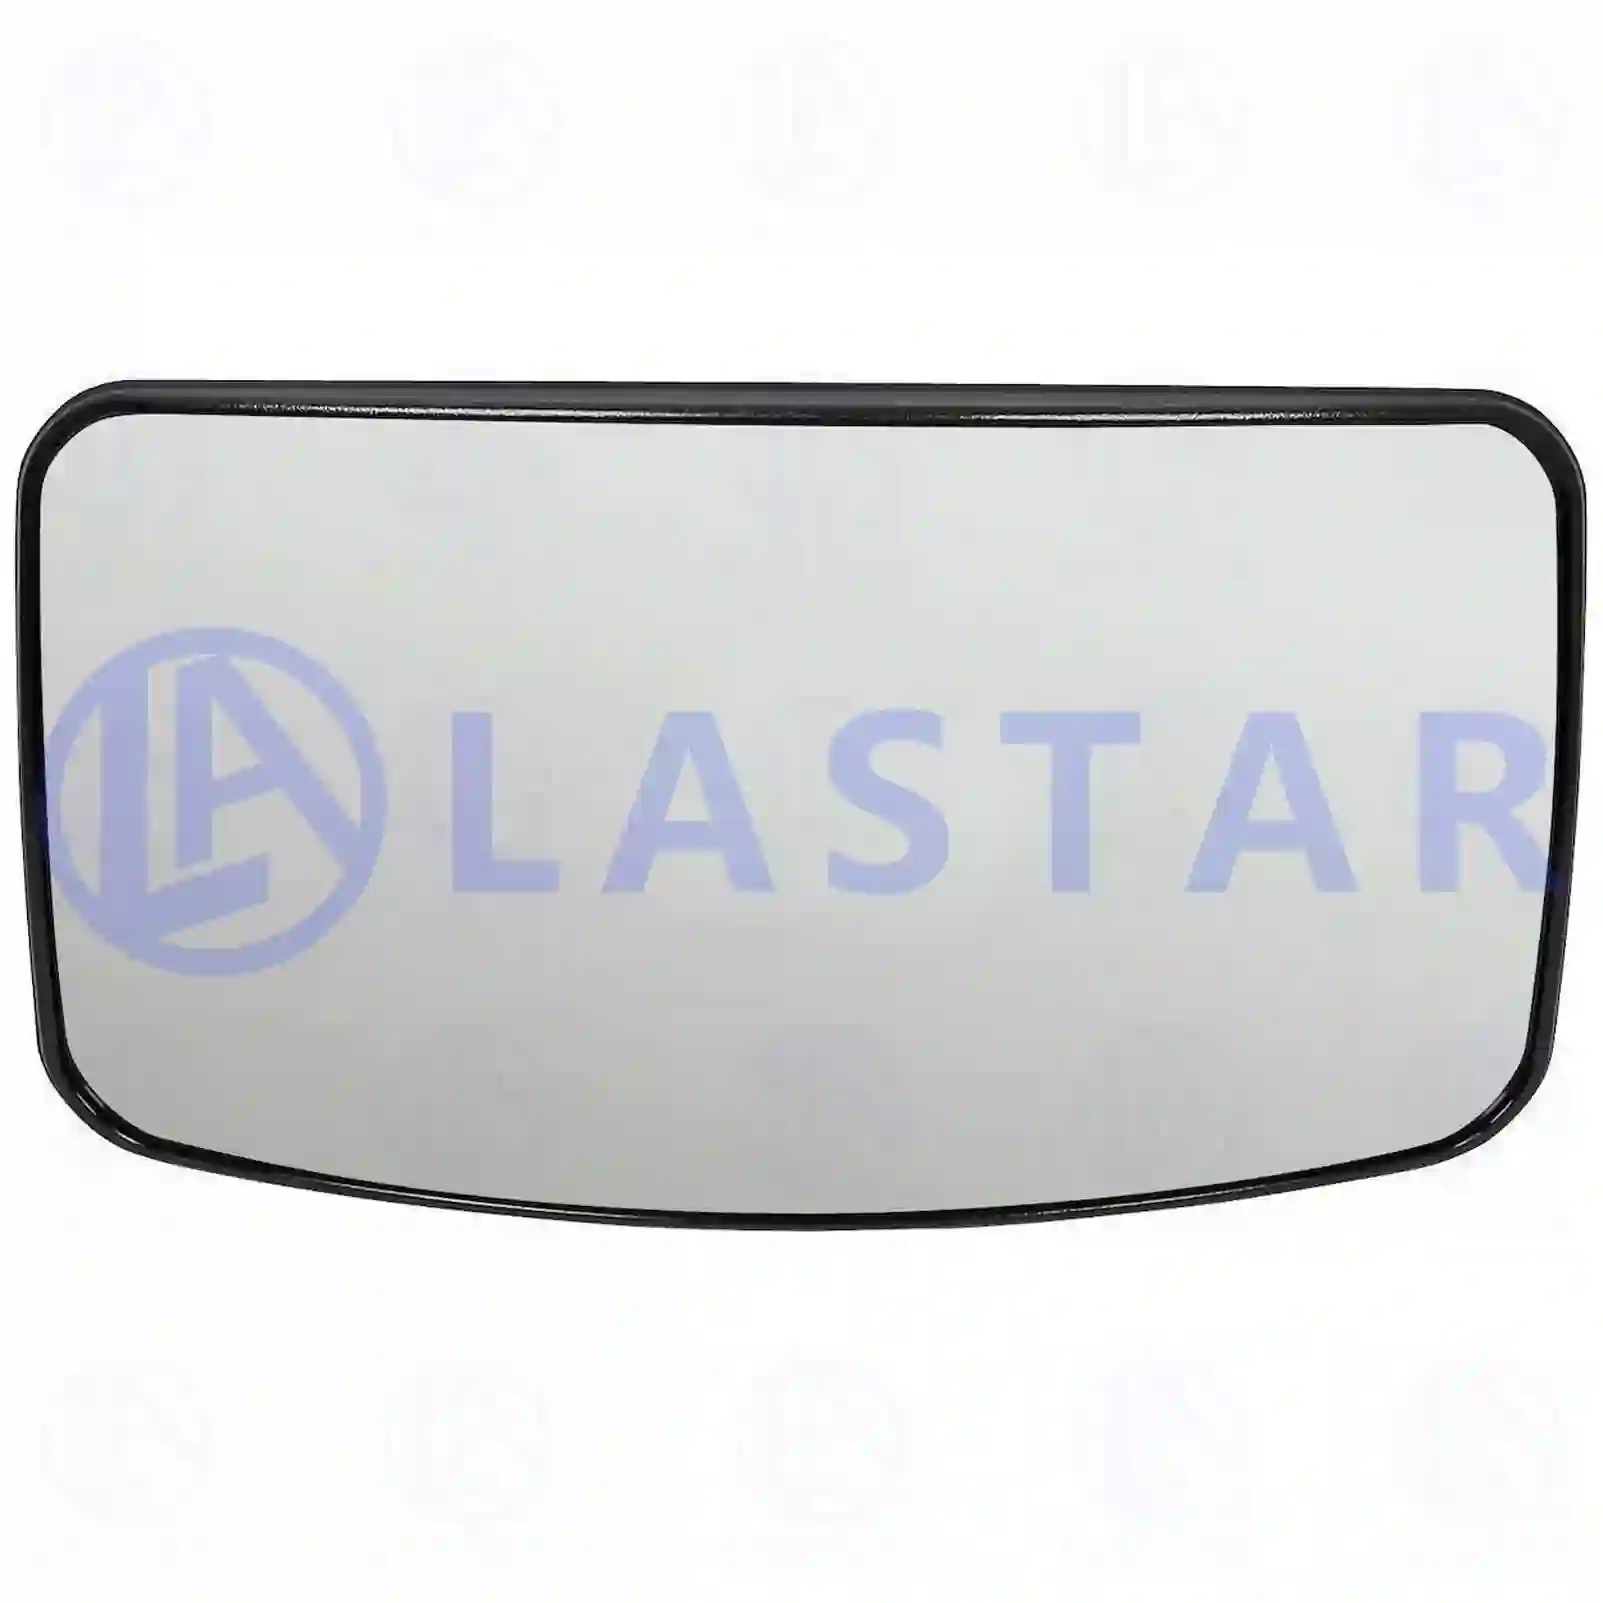 Mirror glass, kerb observation mirror, 77718883, 28110333 ||  77718883 Lastar Spare Part | Truck Spare Parts, Auotomotive Spare Parts Mirror glass, kerb observation mirror, 77718883, 28110333 ||  77718883 Lastar Spare Part | Truck Spare Parts, Auotomotive Spare Parts